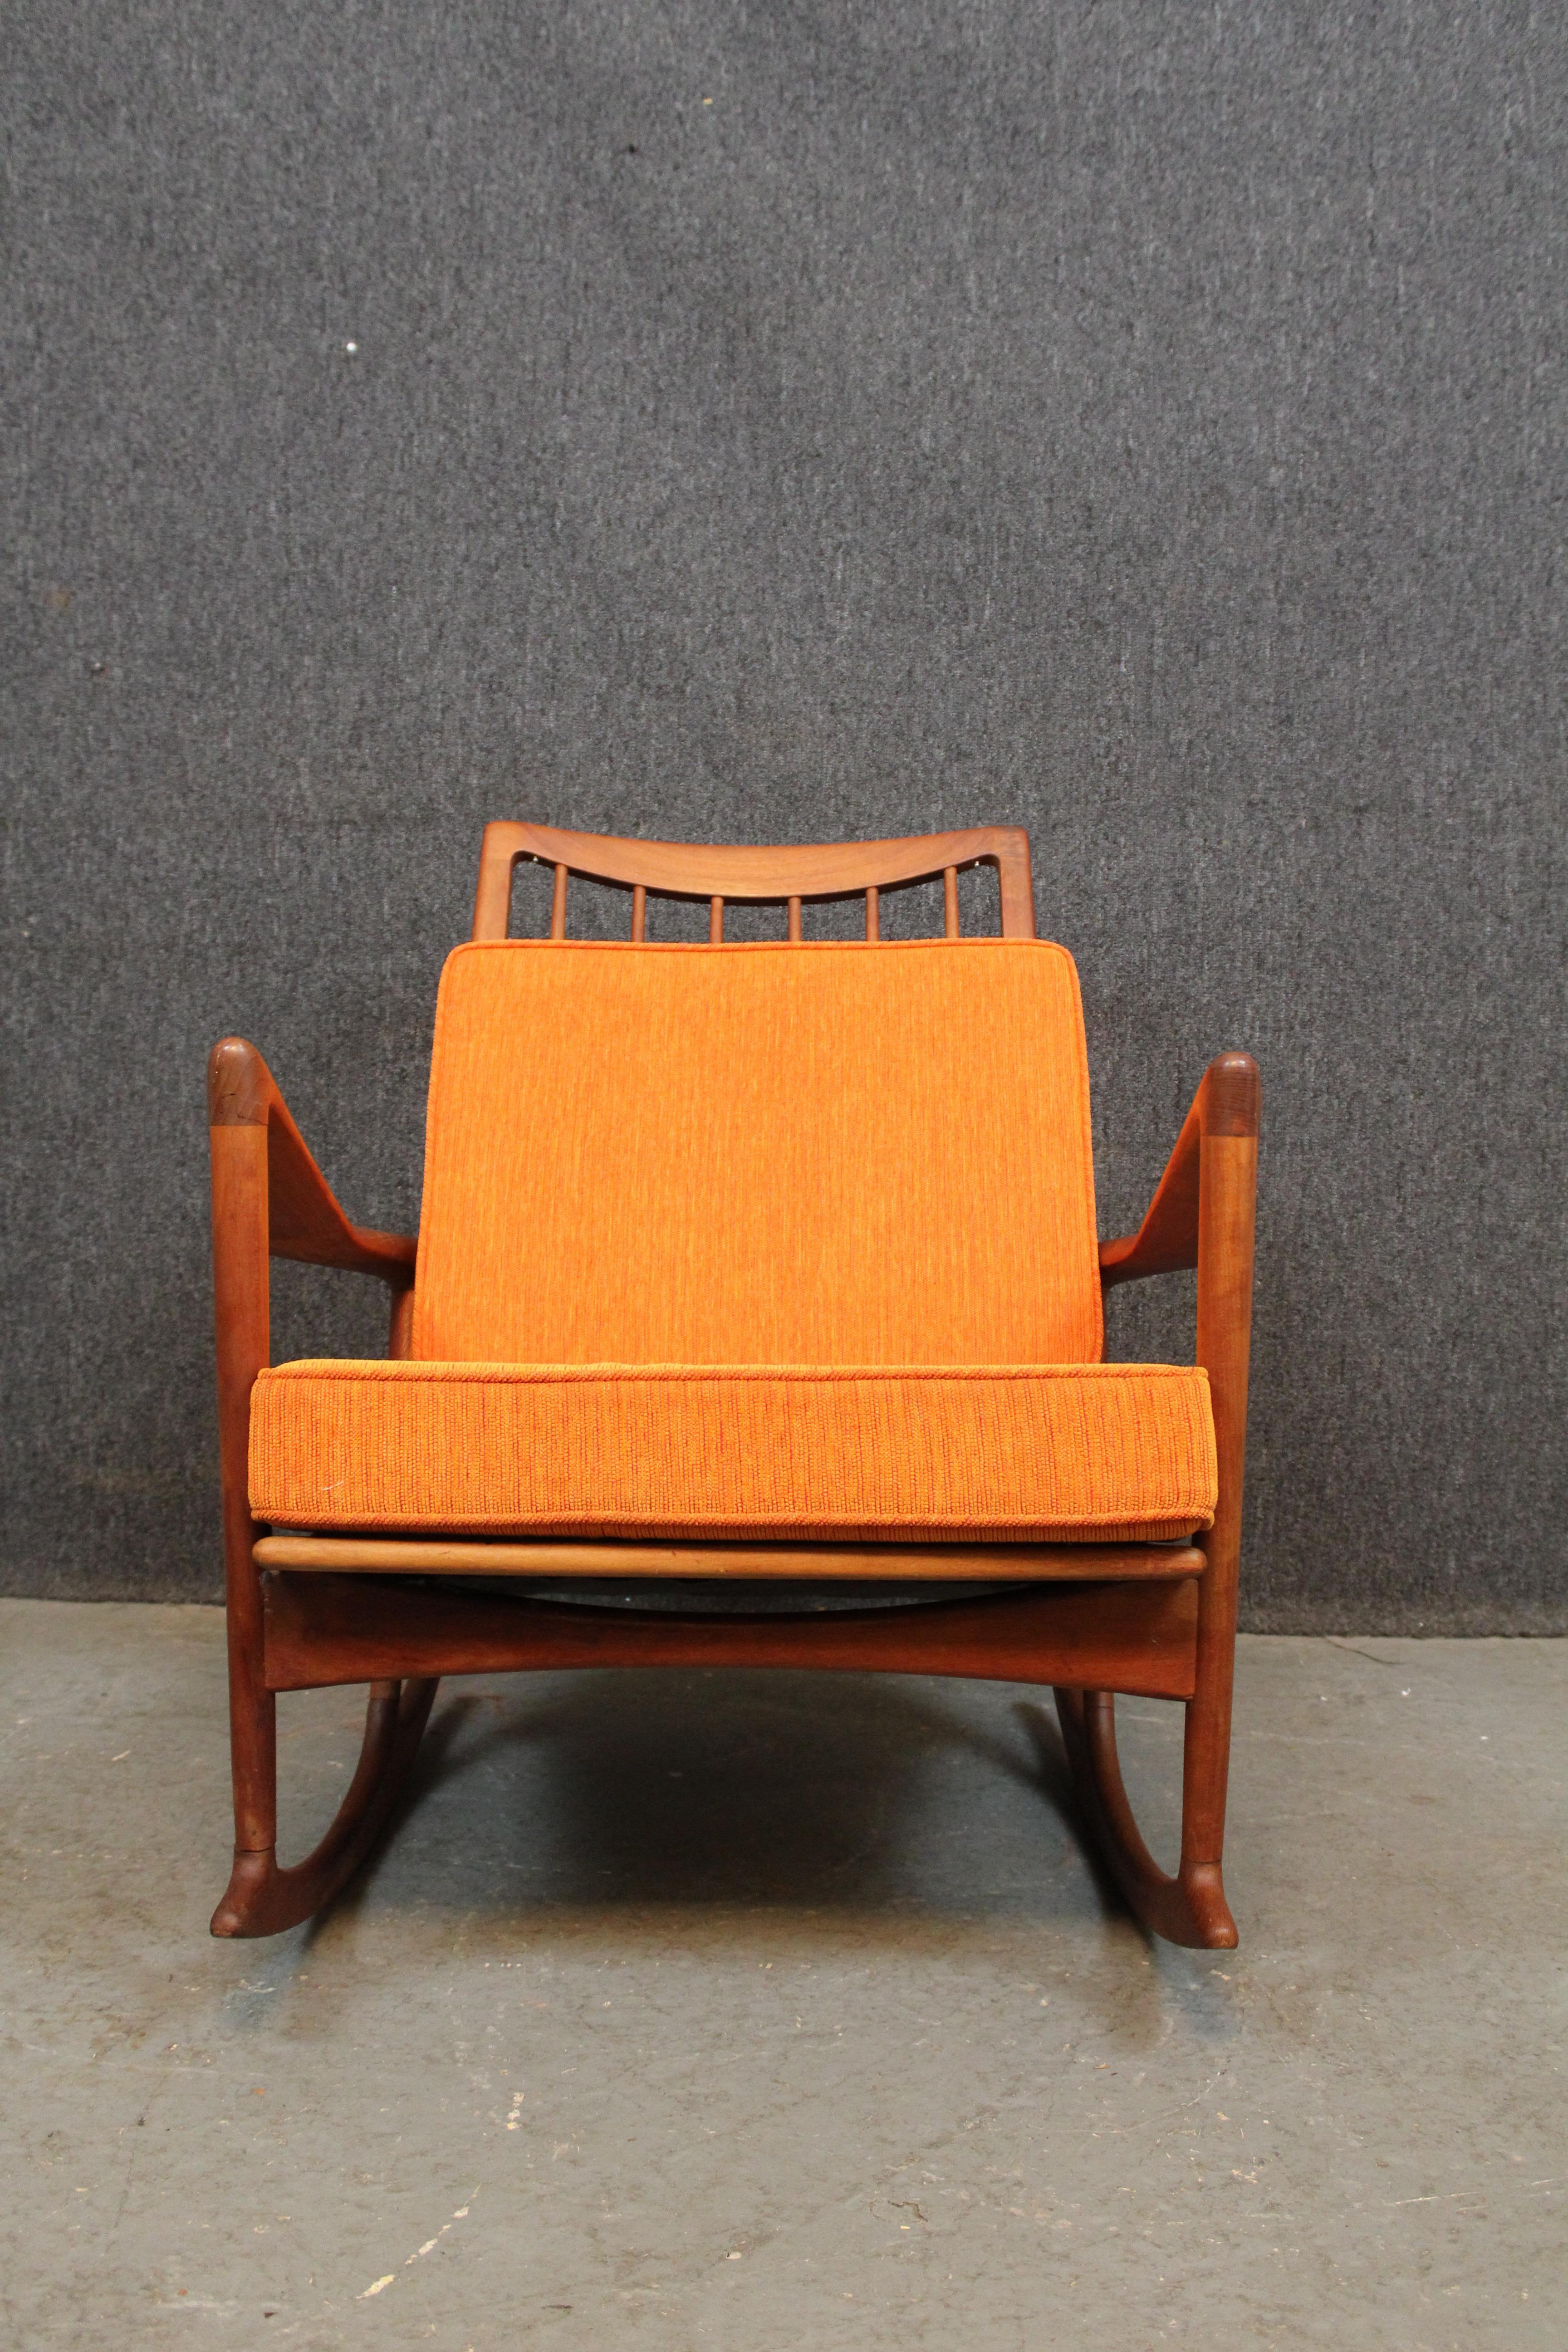 Fabric Vintage Sculptural Rocking Chair by Ib Kofod-Larsen for Selig Denmark For Sale